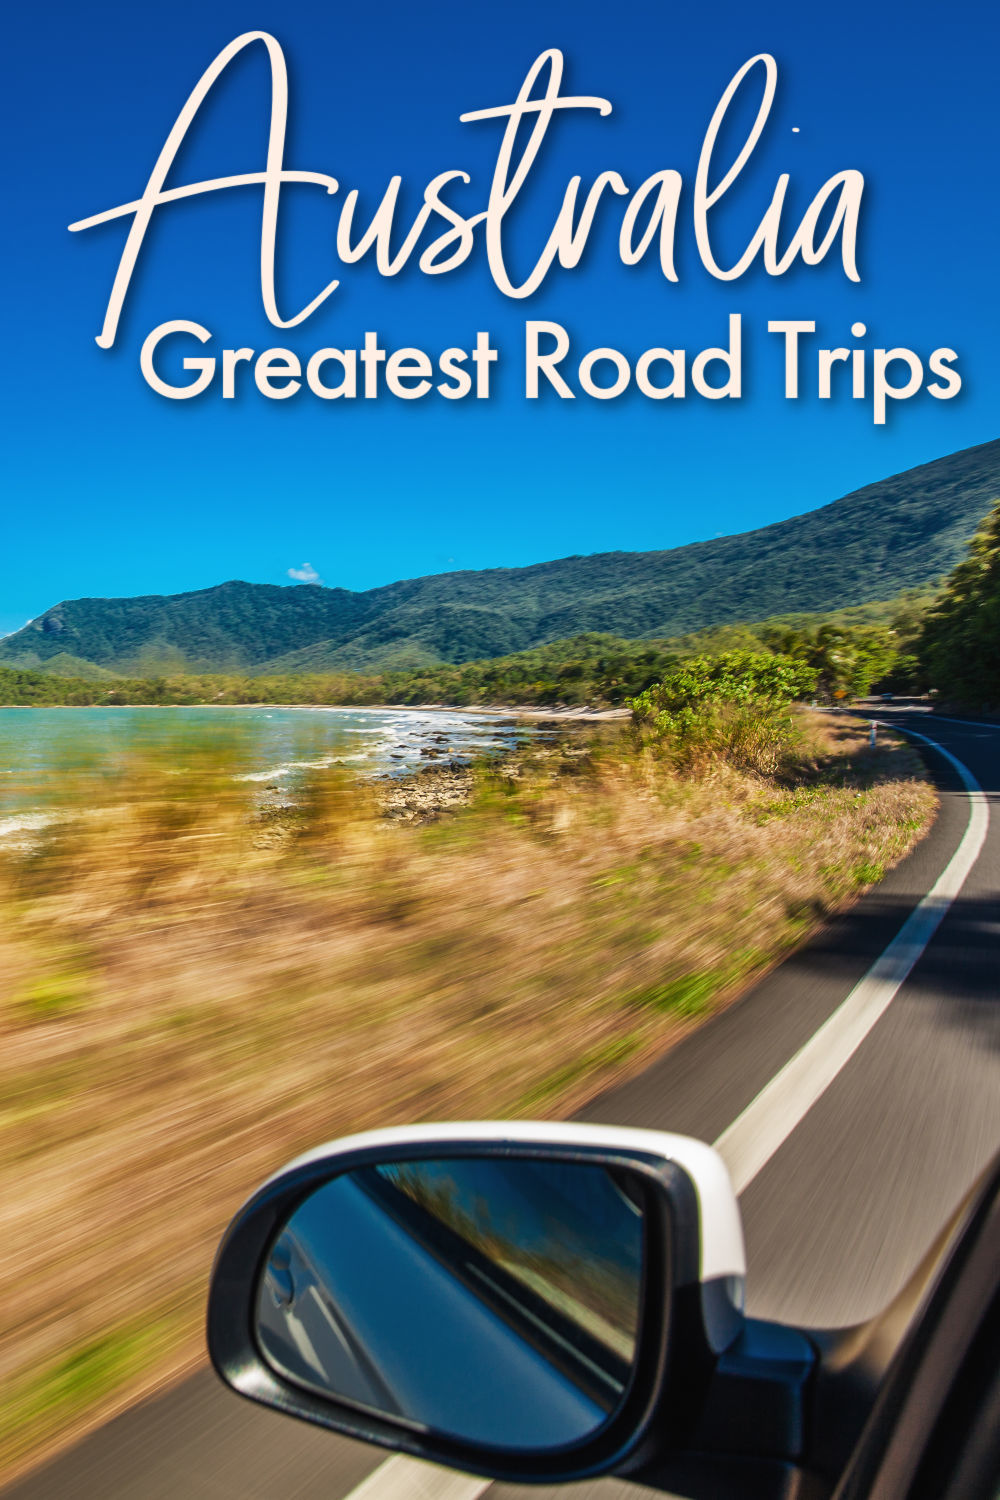 Road trips in Australia Bucket List: the Big Lap, Australian East Coast road trip, Kangaroo Island, Red Centre Way road trip, and four more scenic drives. All you need to know to plan your perfect road trip in Australia. 